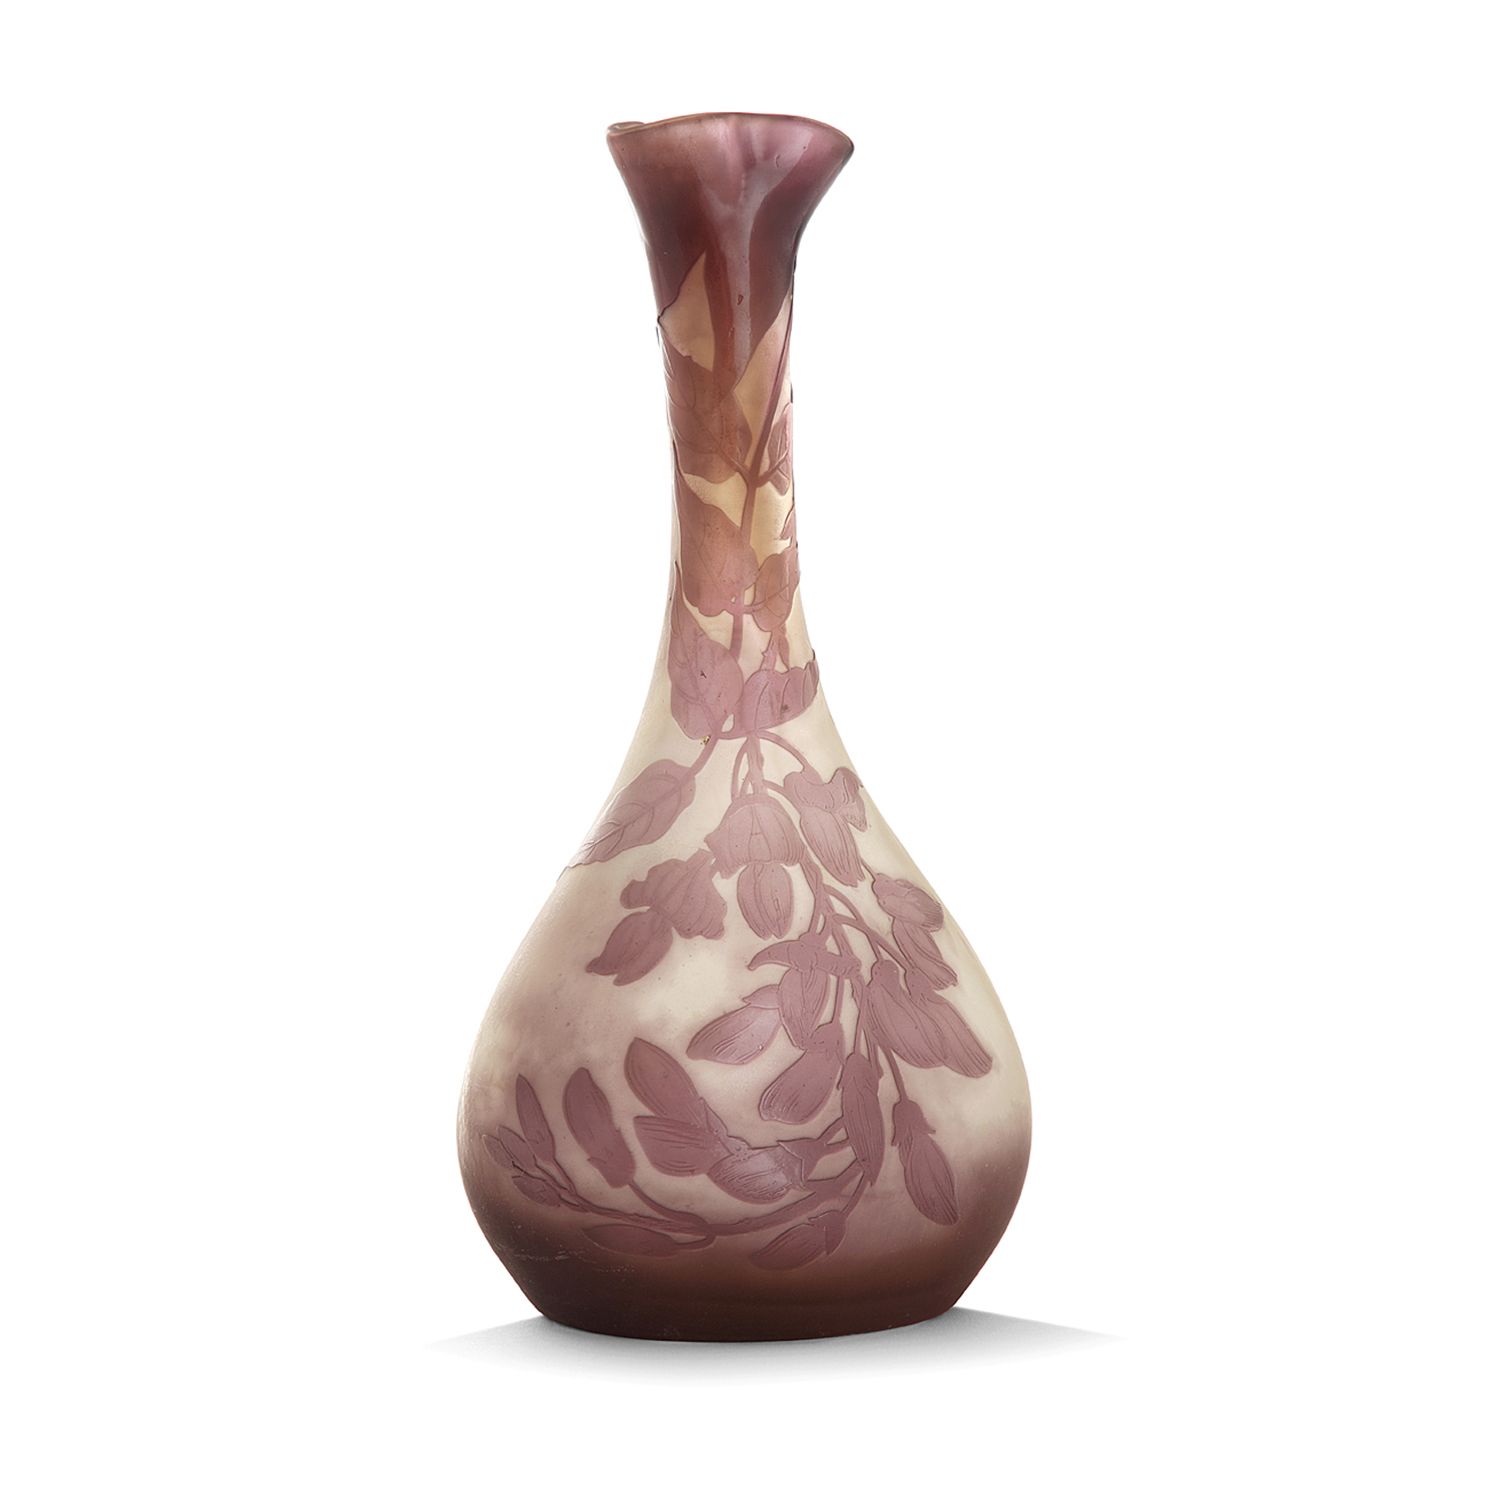 Null GALLÉ ESTABLISHMENTS (1904-1936)

Baluster vase with a high three-lobed nec&hellip;